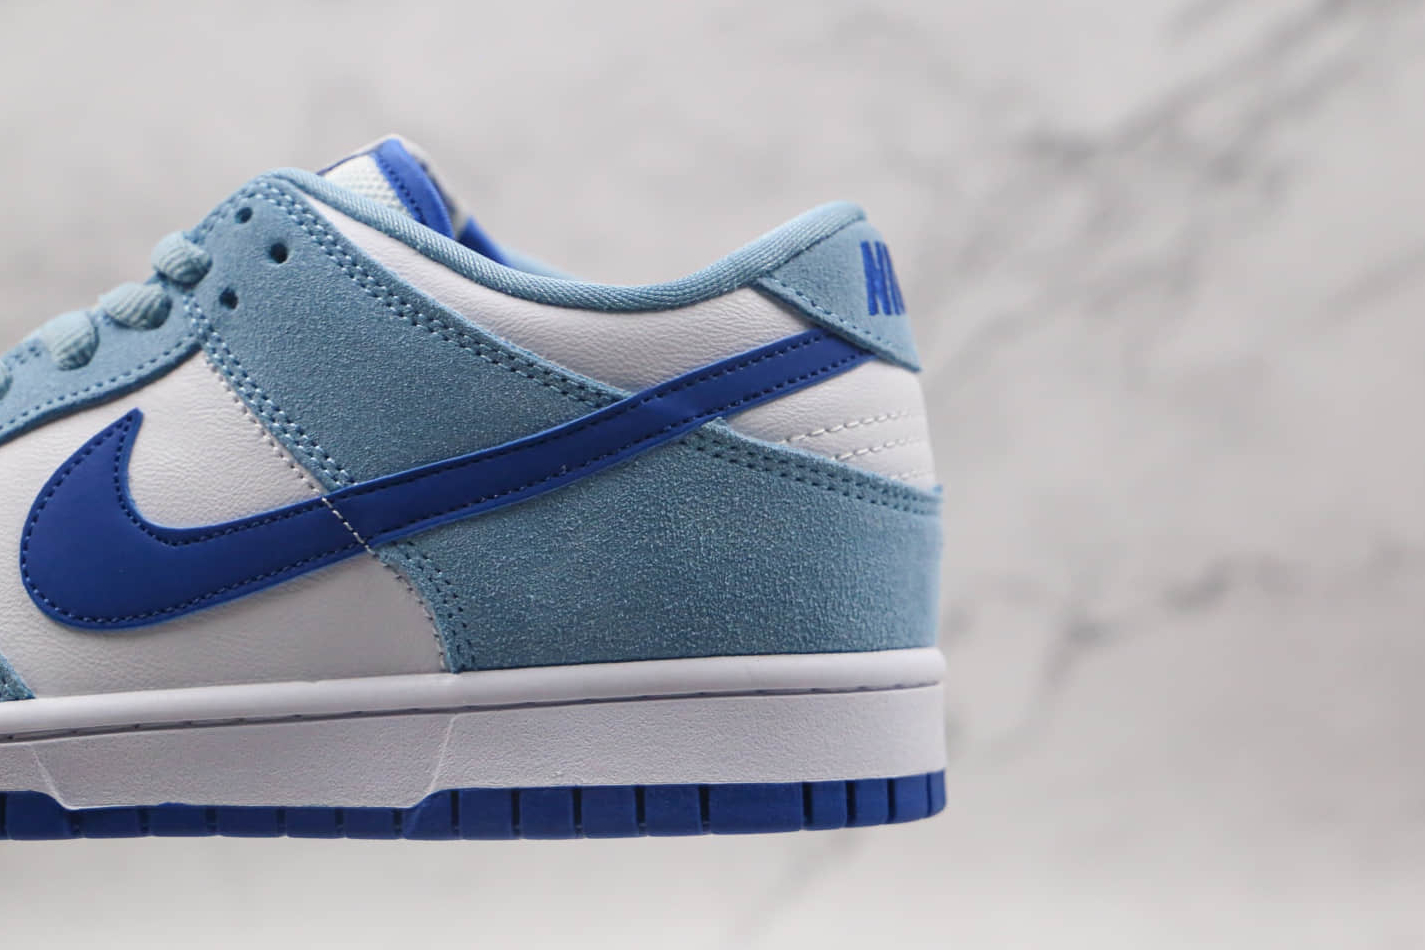 Nike Dunk Low White Light Blue Dark Blue 854866-009 - Stylish and Versatile Sneakers